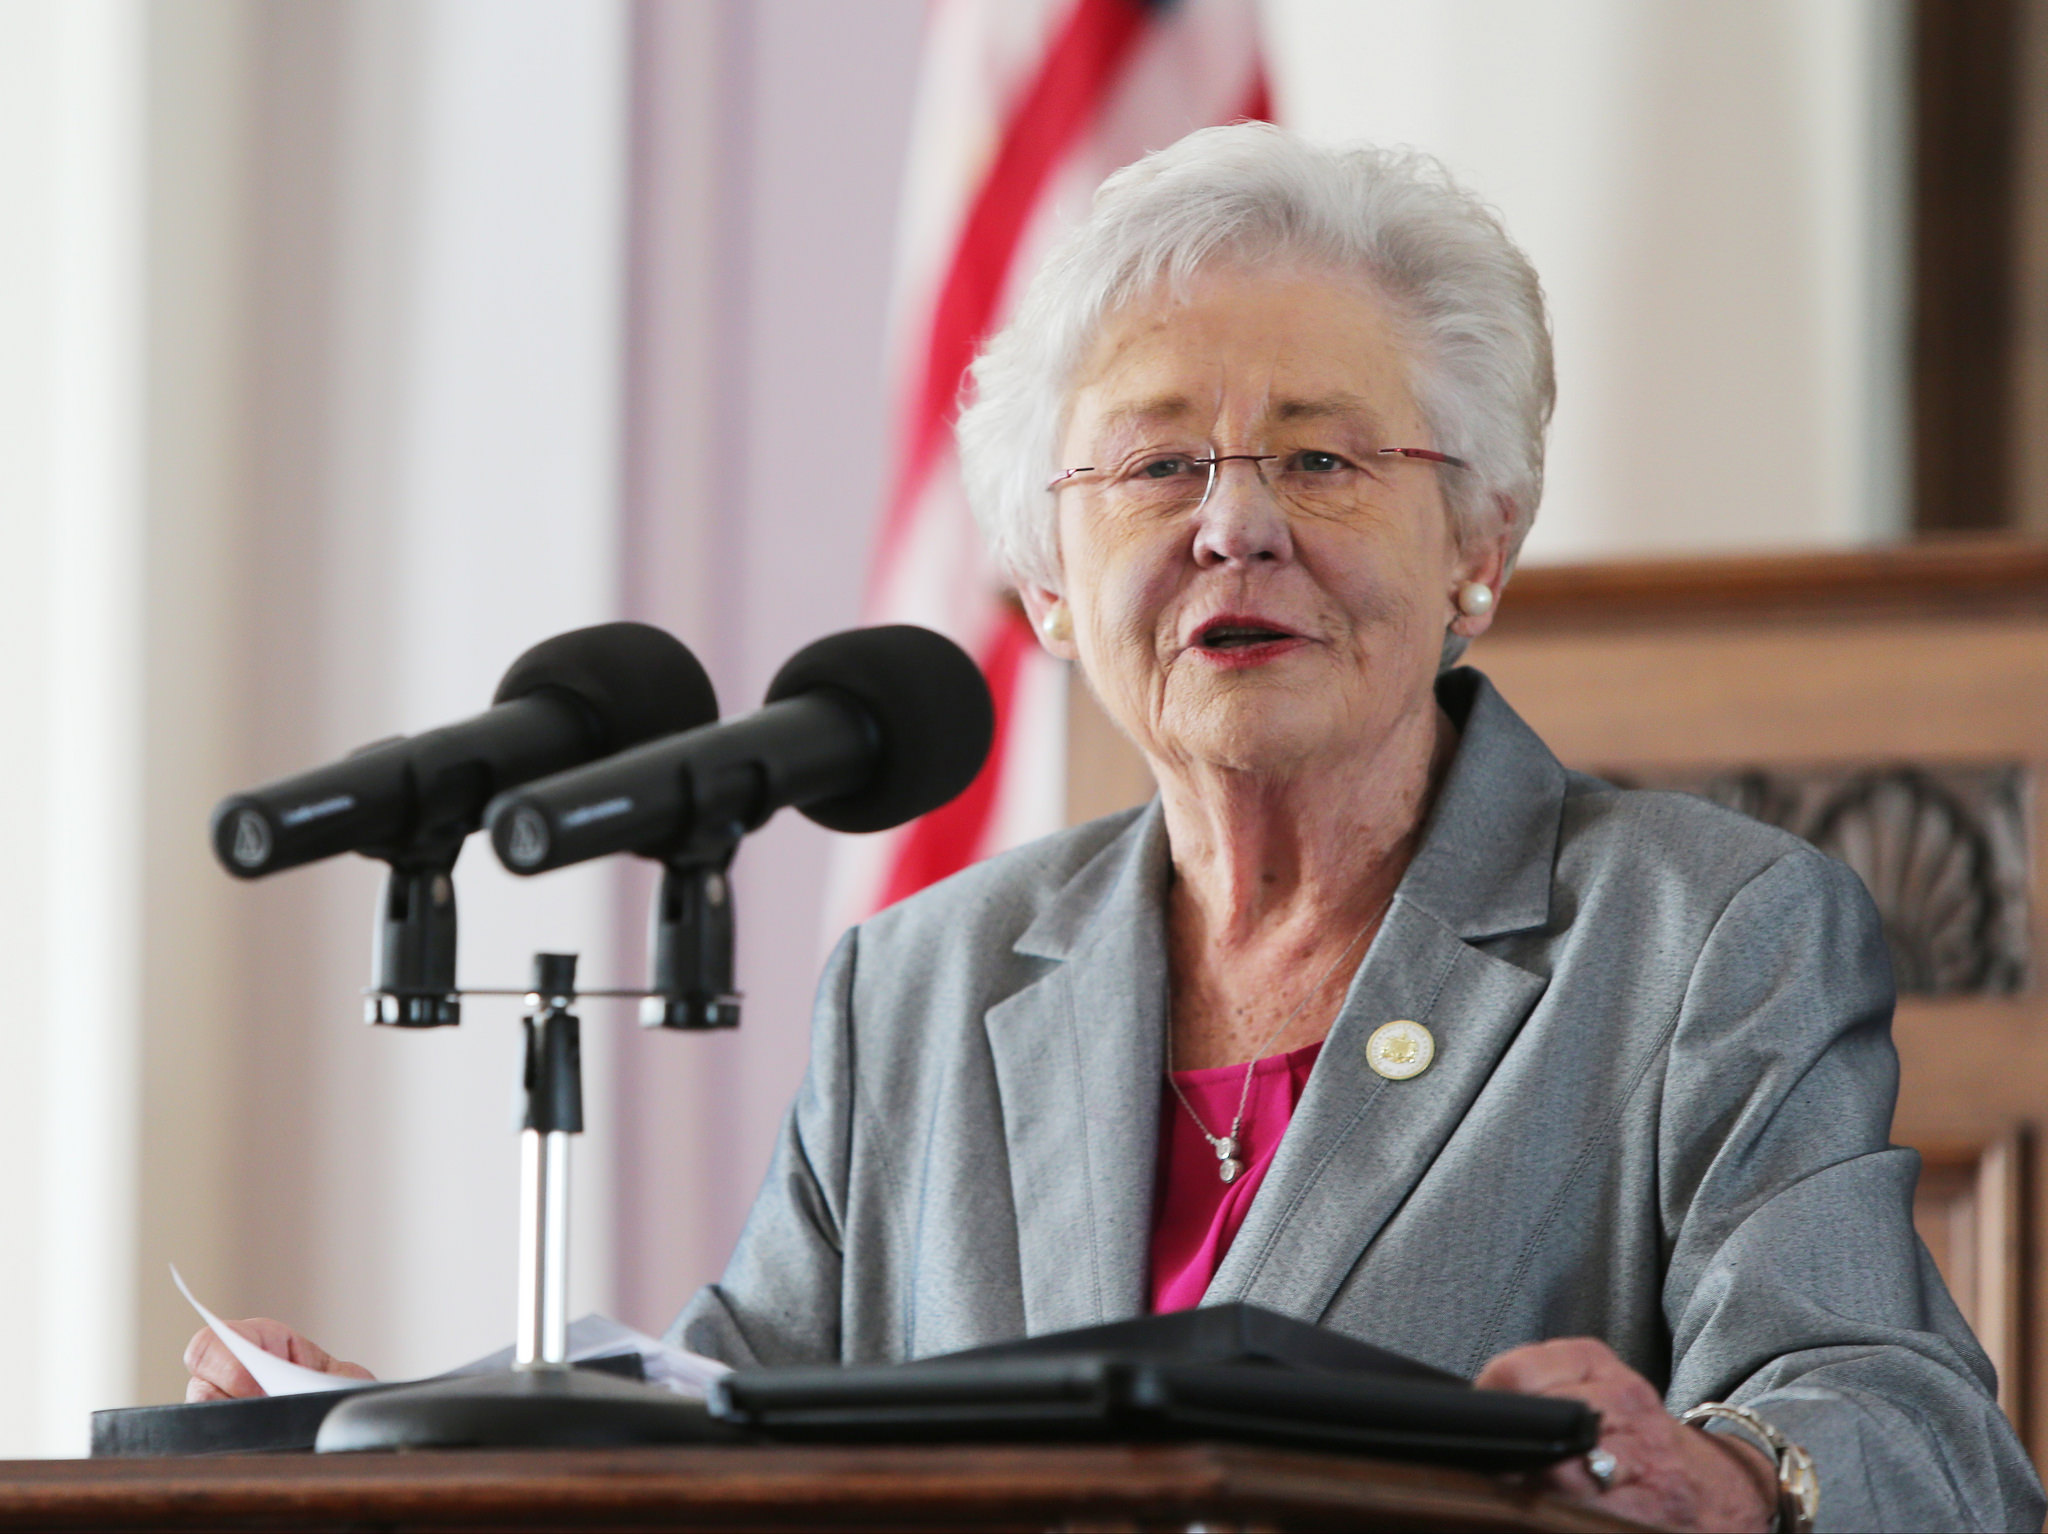 governor-portrait-official-governor-kay-ivey-flickr